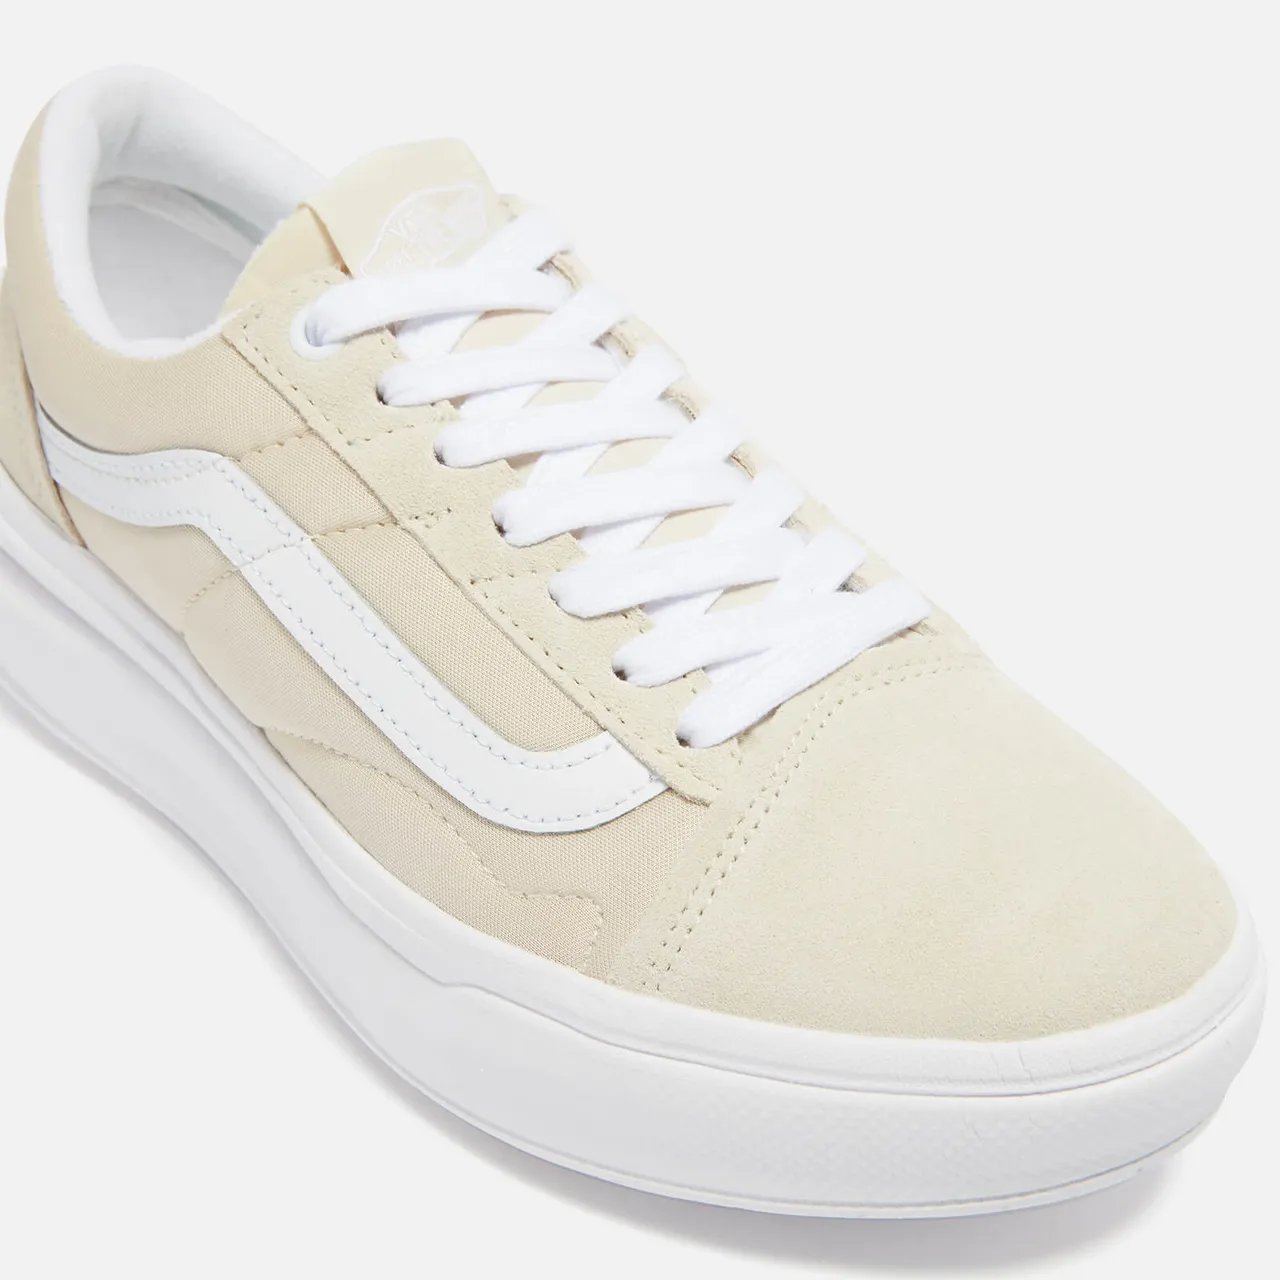 Vans Comfycush Old Skool Overt Suede and Canvas Trainers